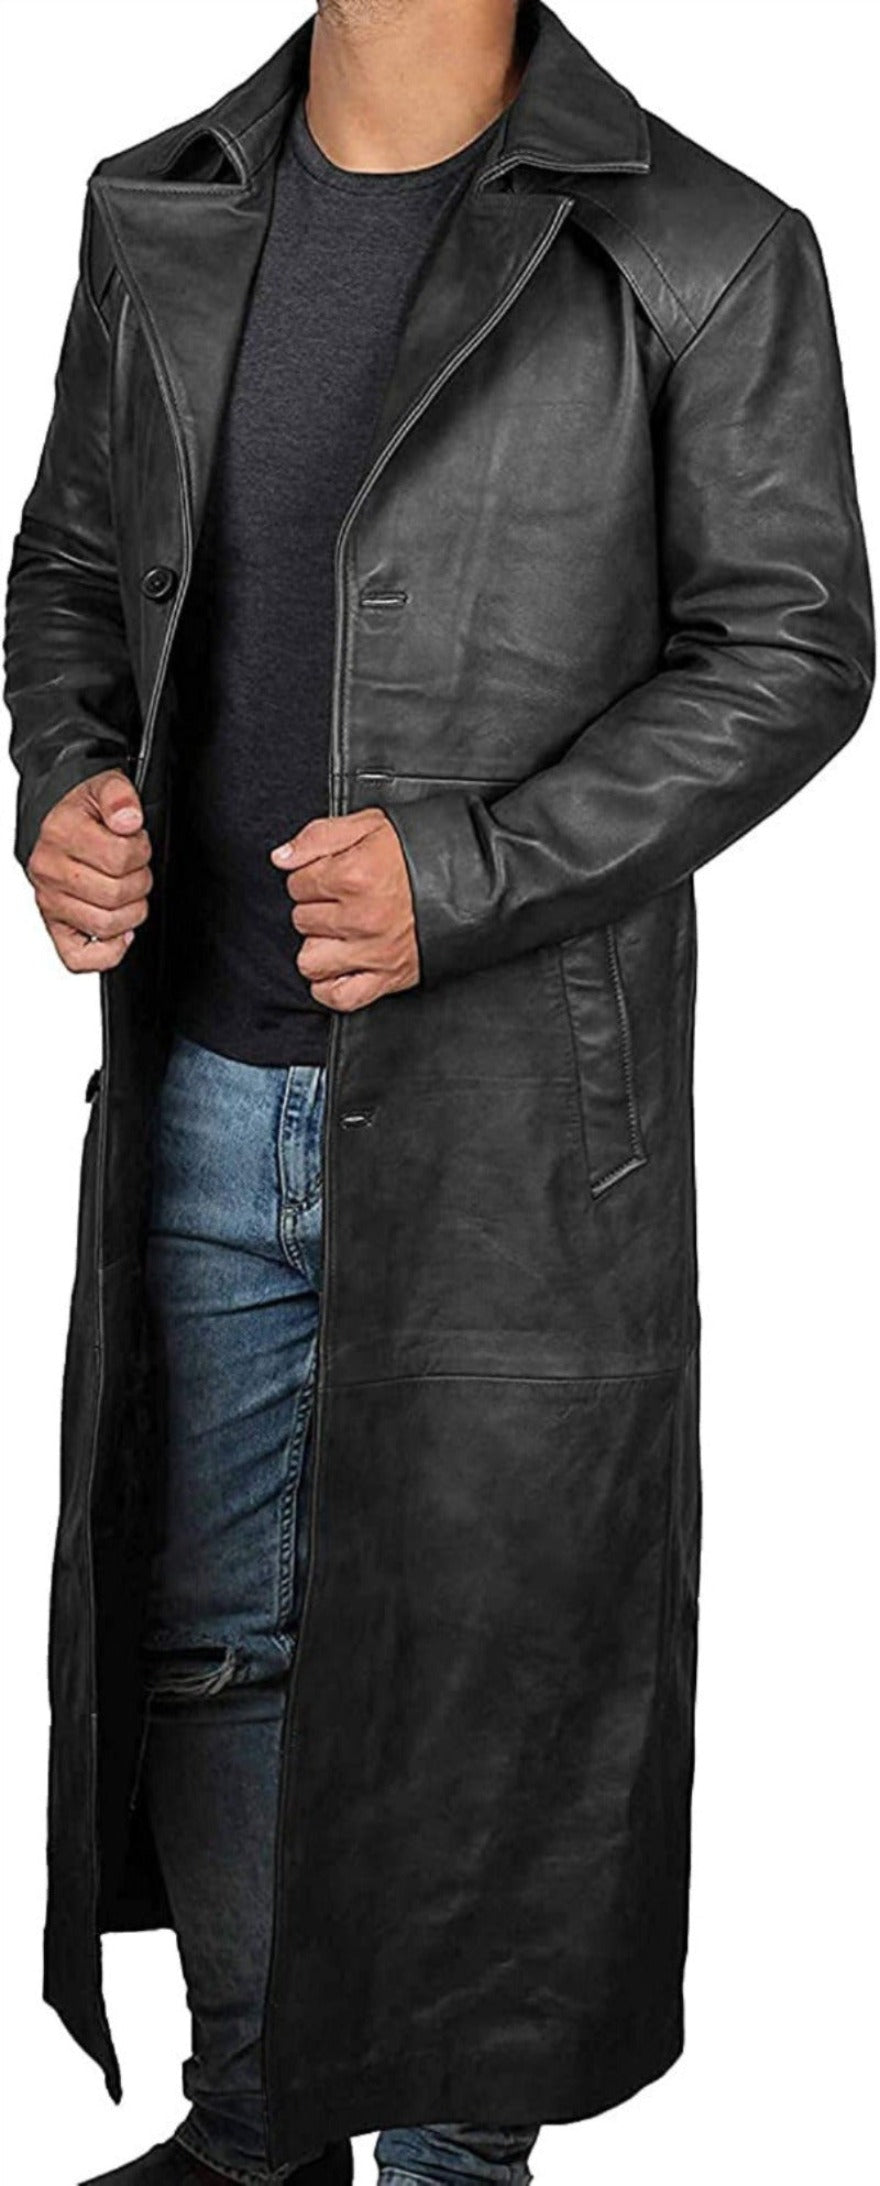 Picture of a model wearing our mens leather trench coat full length, Black color, side view